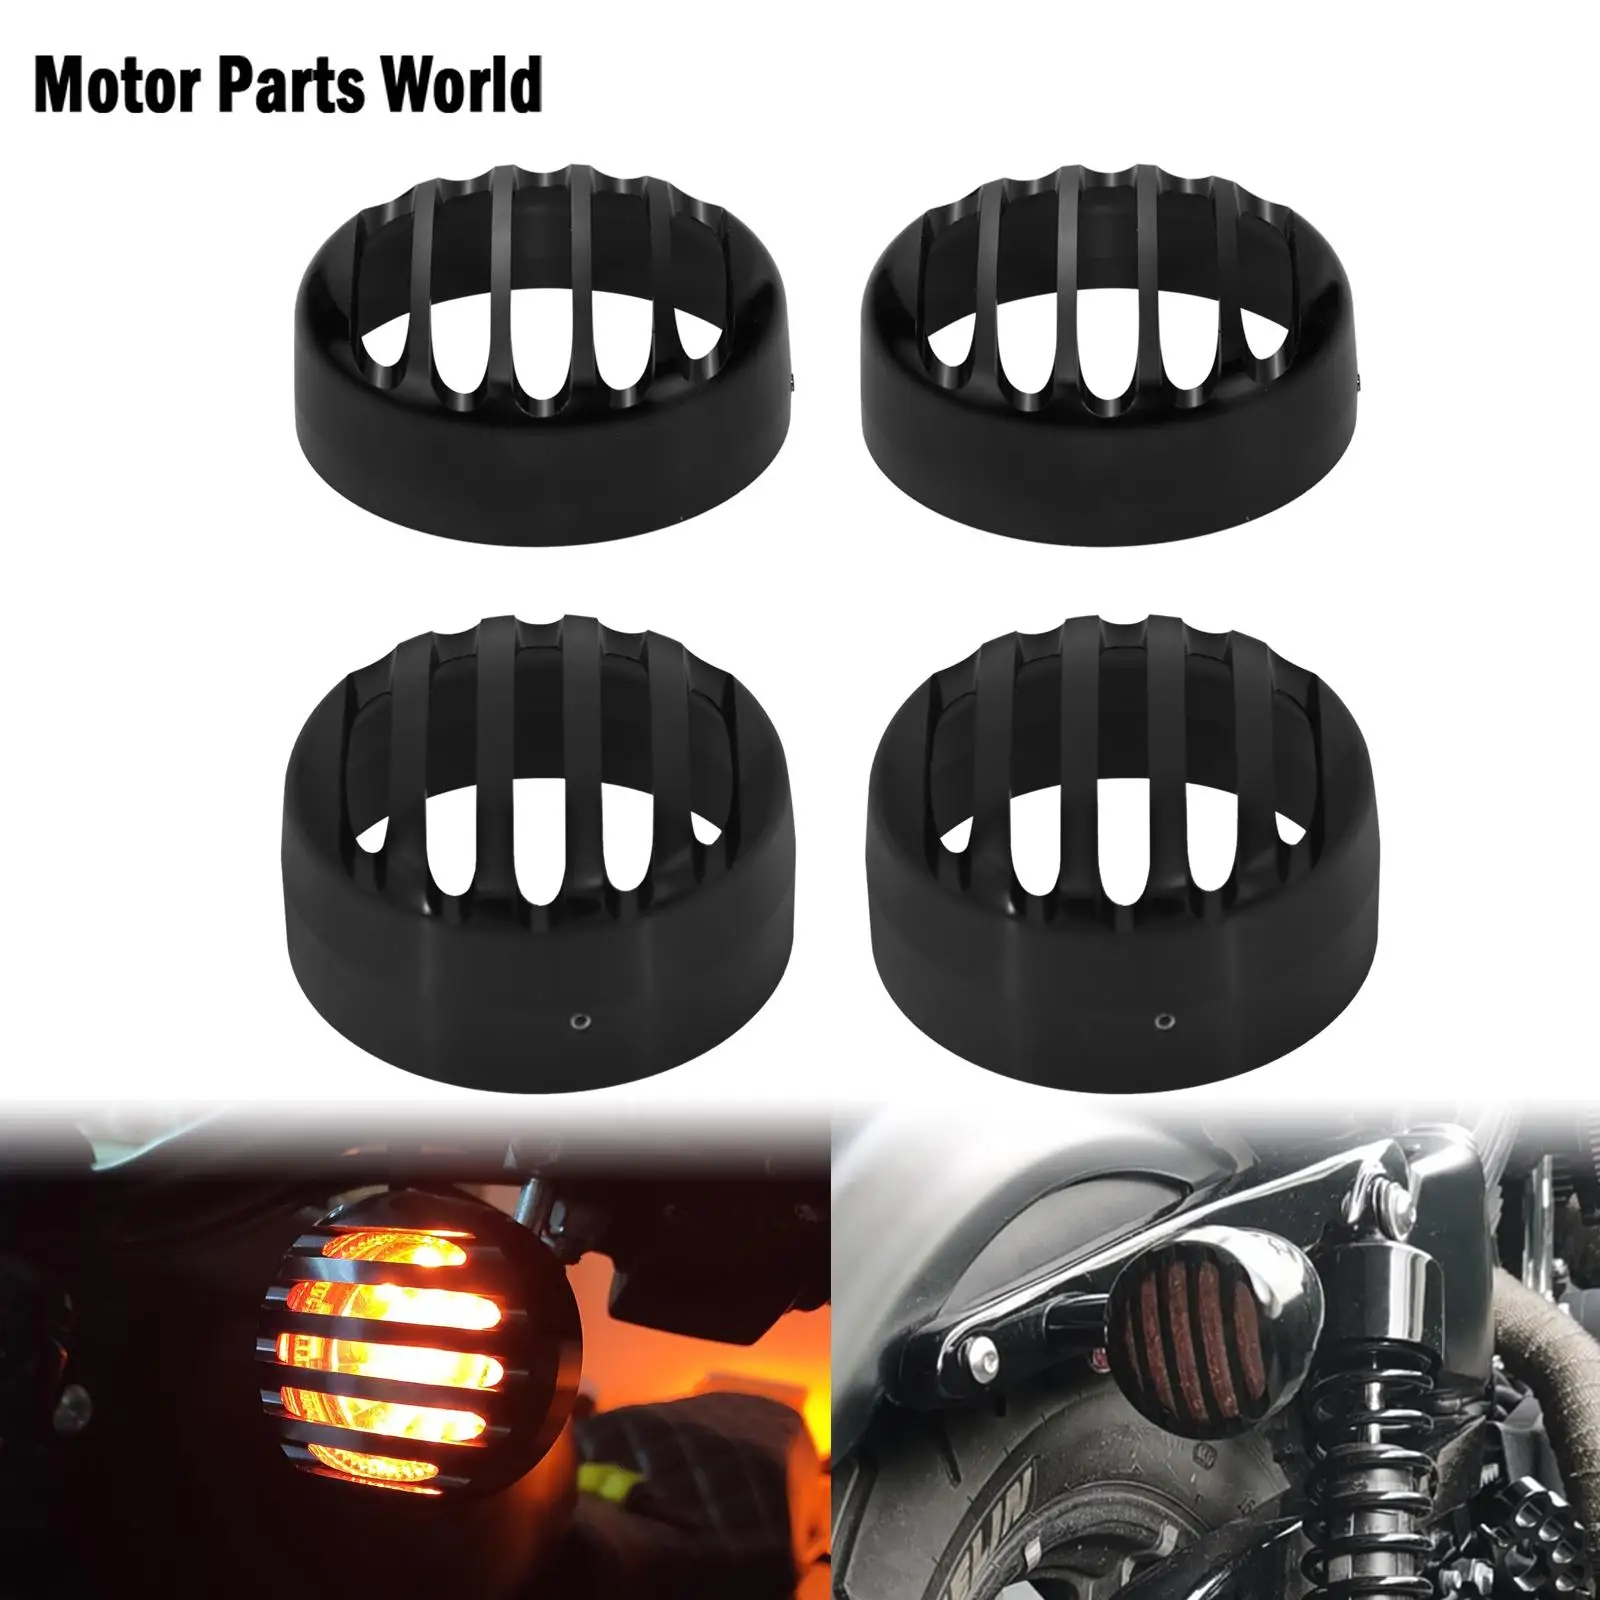 

2xMotorcycle Front Rear Turn Signal Indicator Grill Bezel Cover Black For Harley Sportster XL Iron Nightster SuperLow 1992-2020